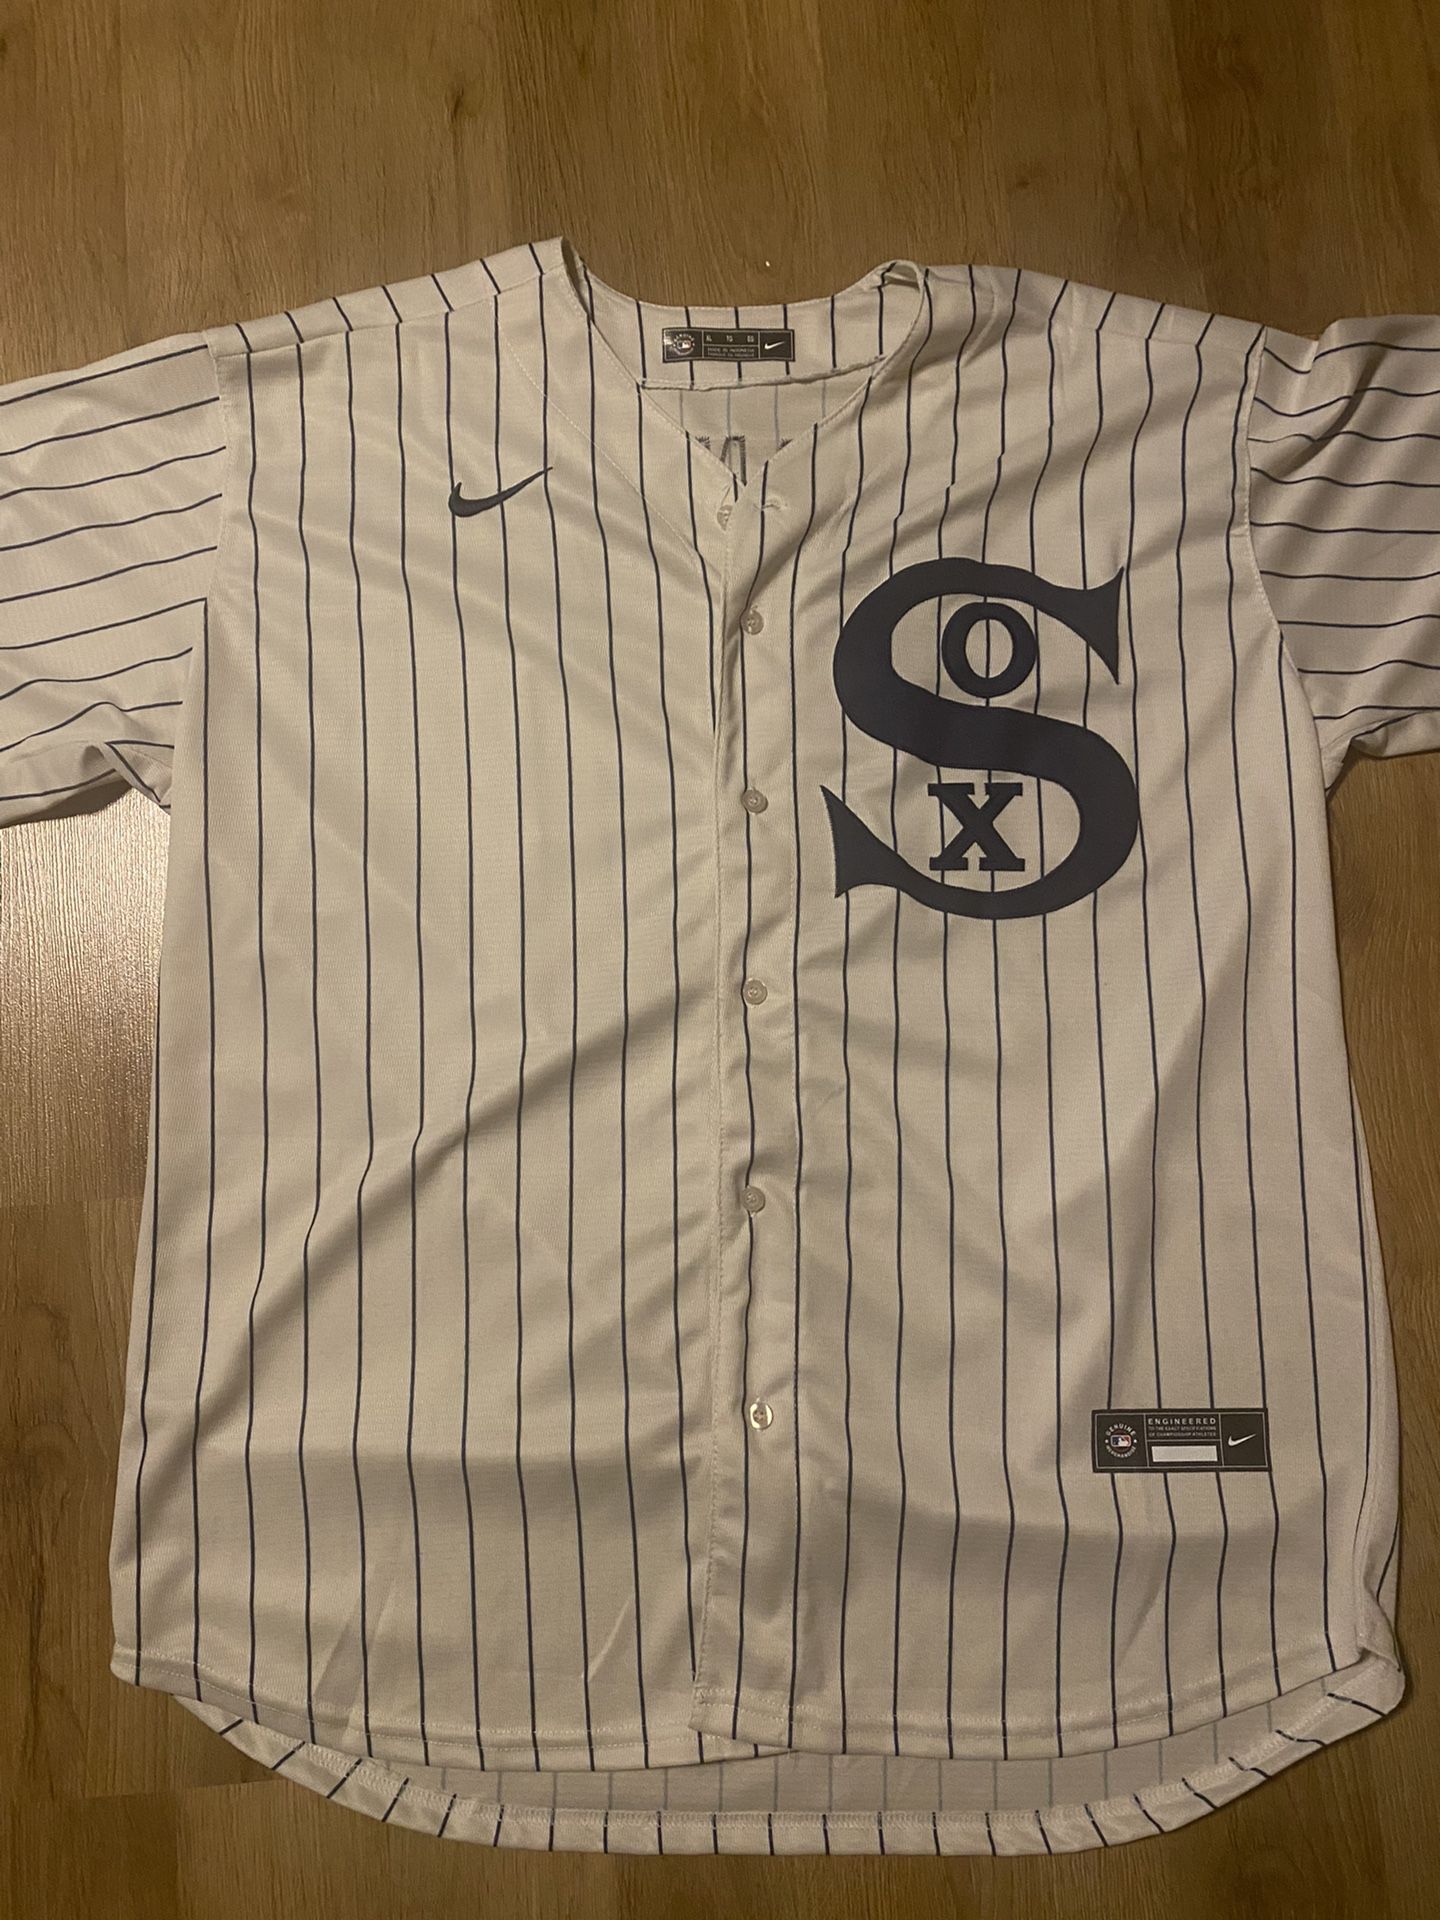 white sox field of dreams jersey for sale